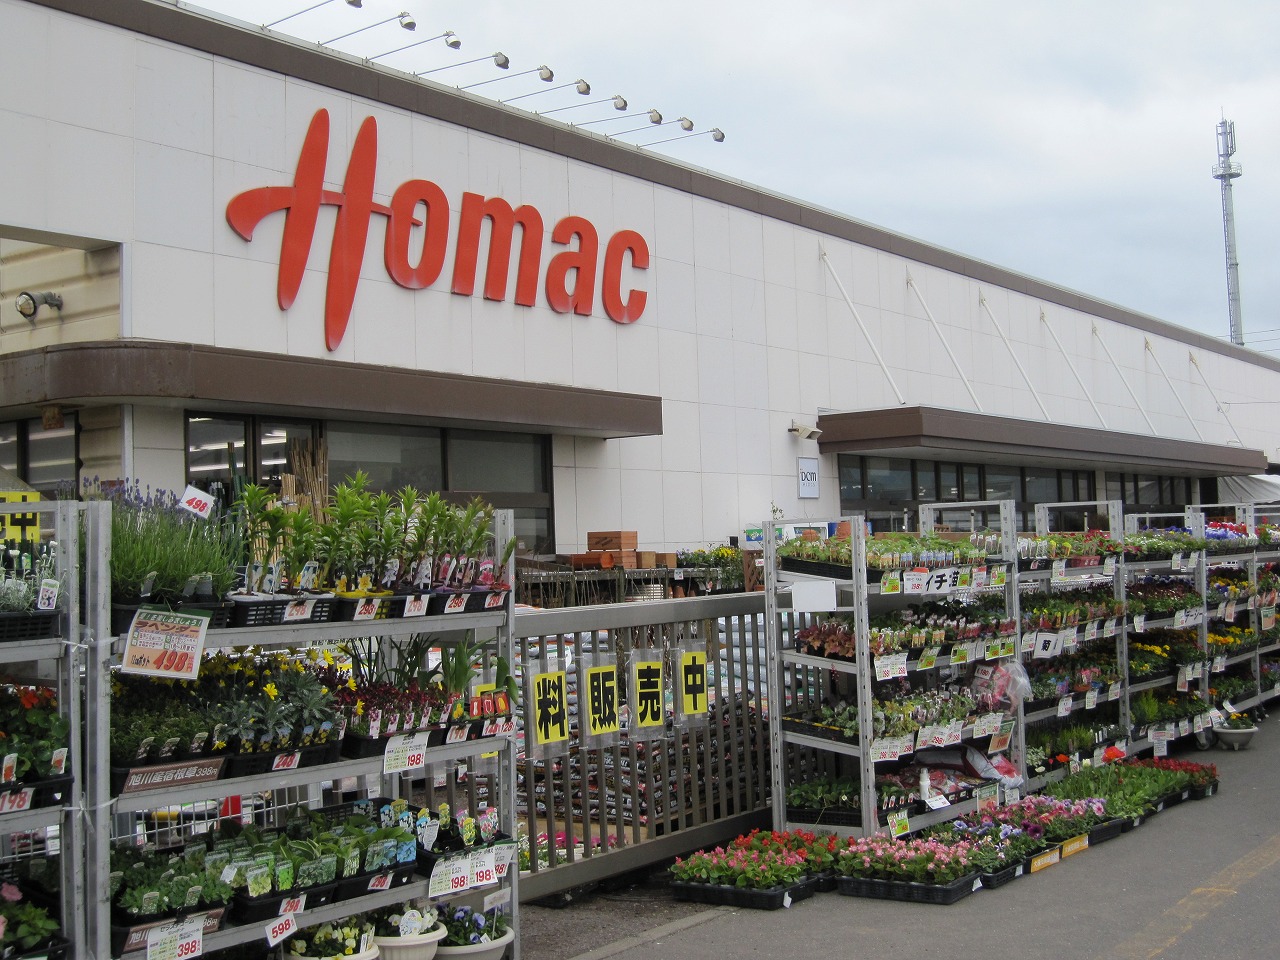 Home center. Homac Corporation Itoi to the store (hardware store) 2663m